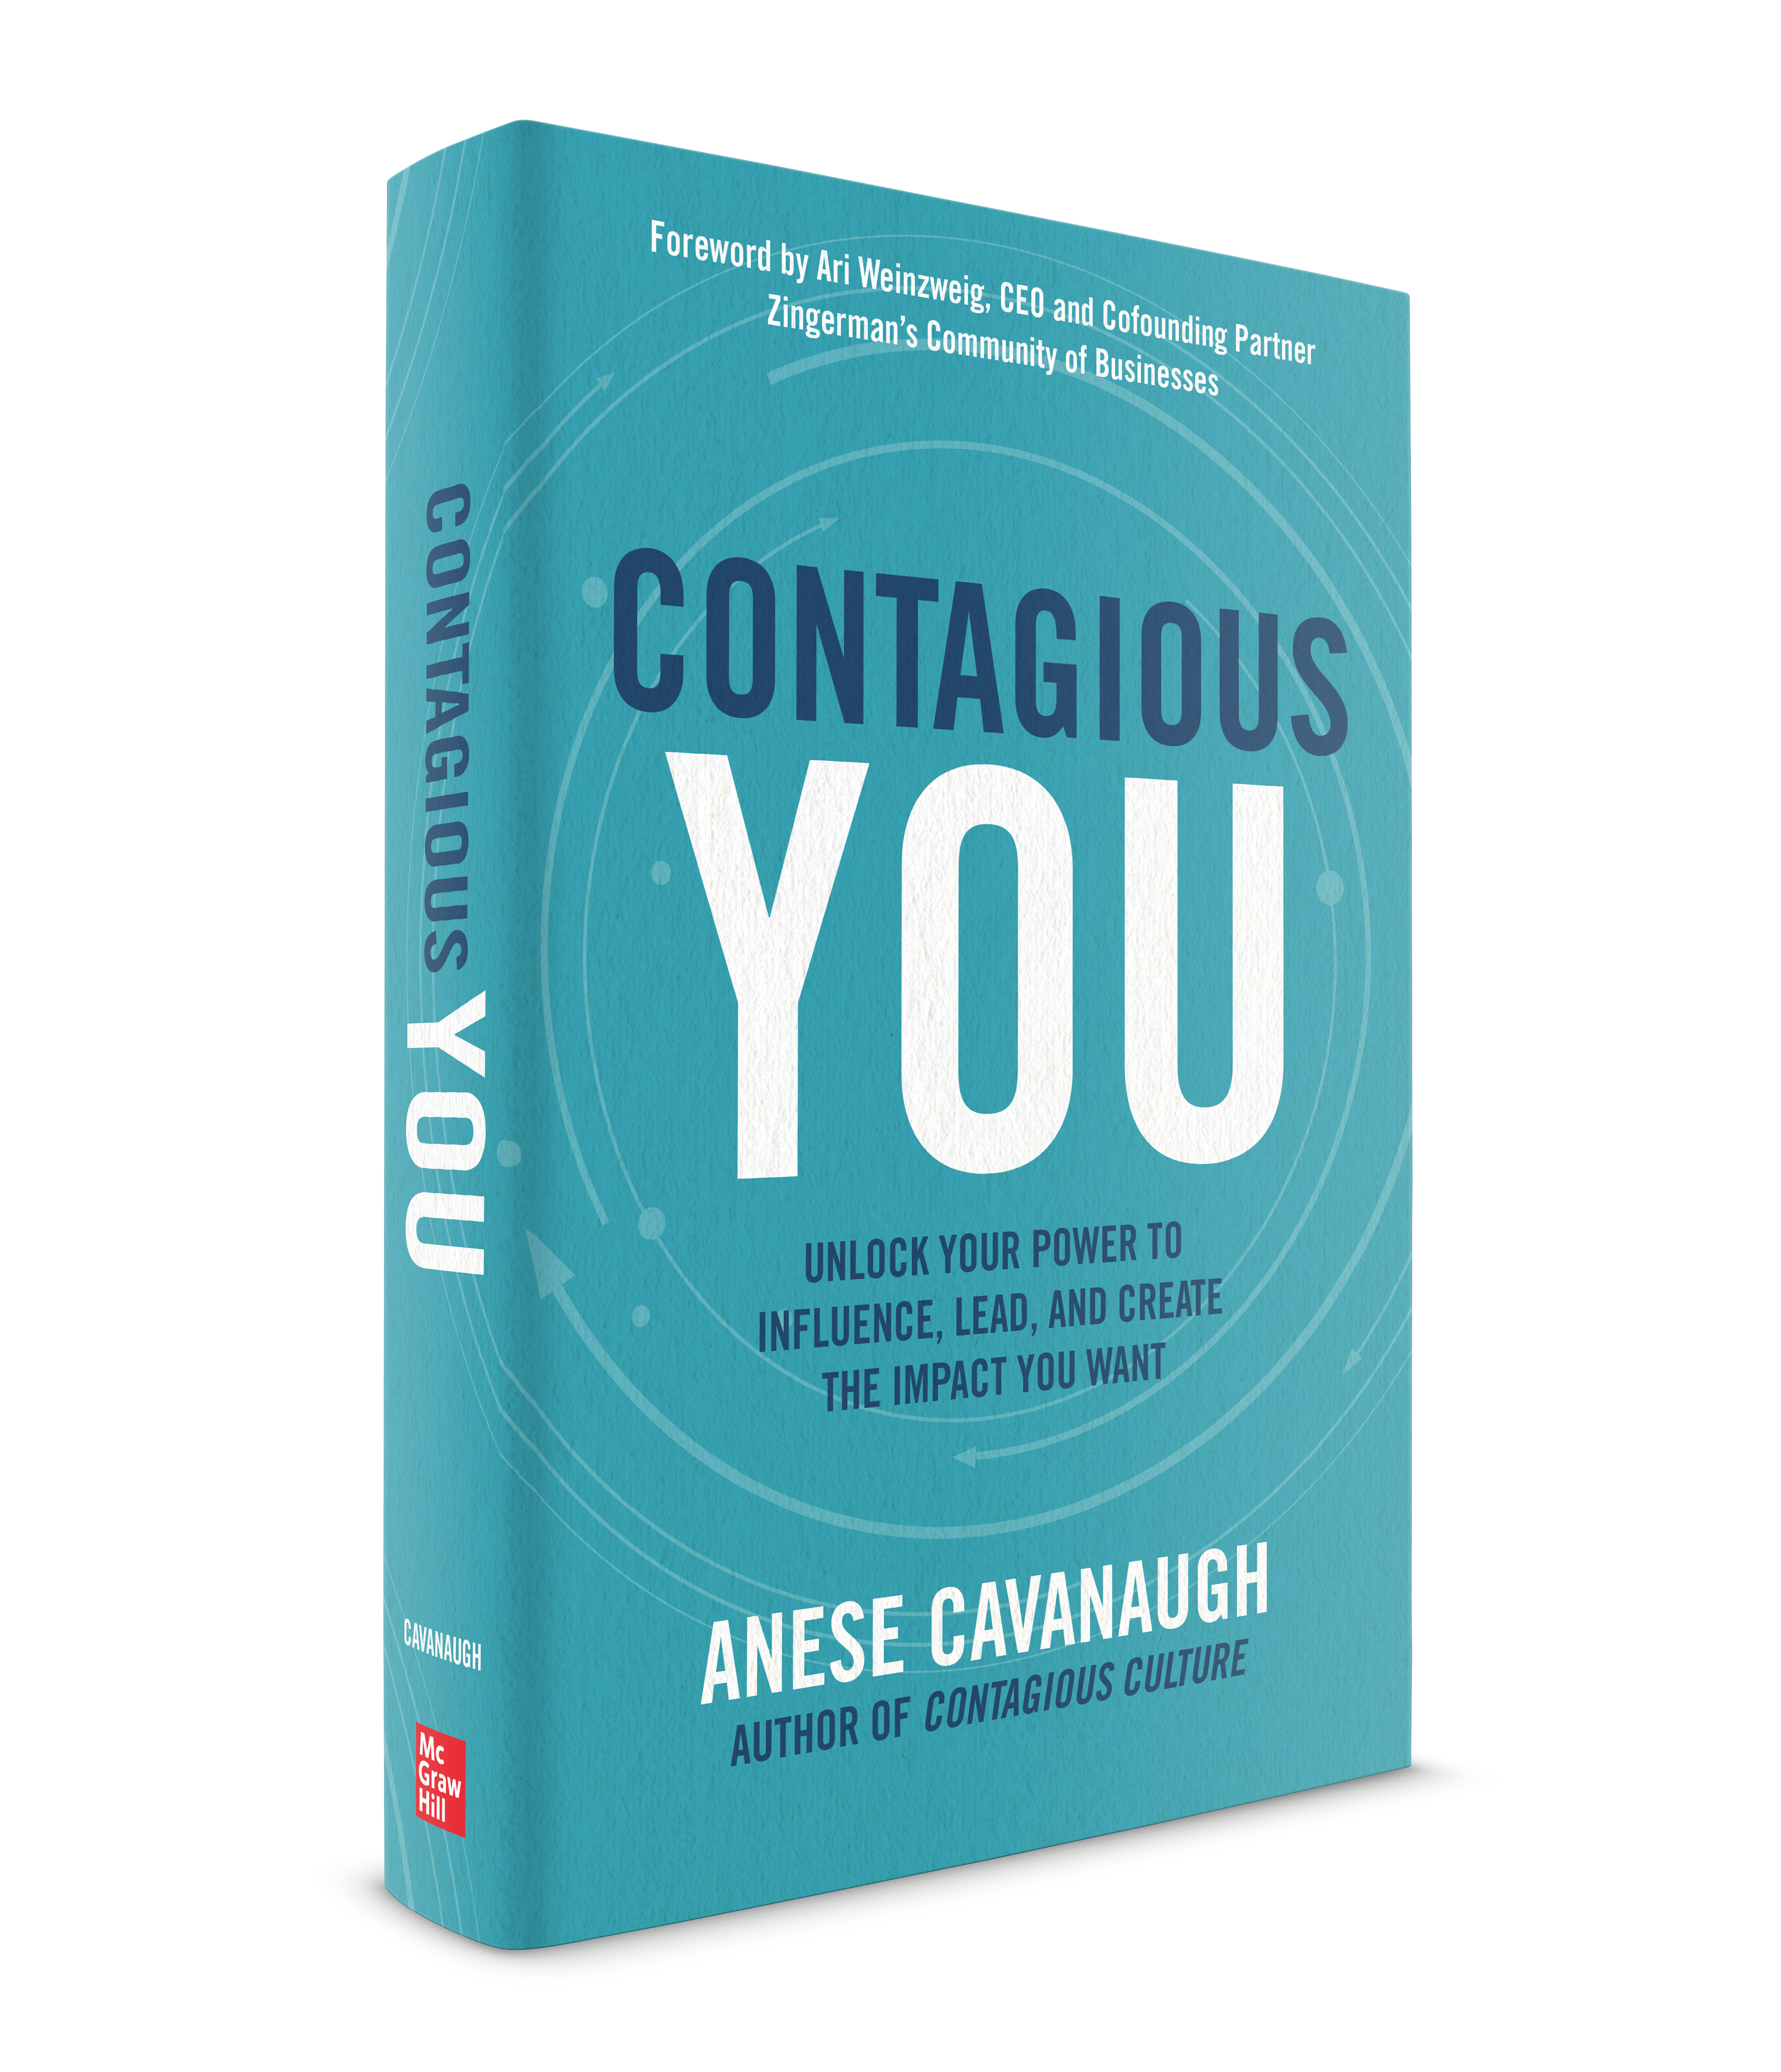 Contagious You book image